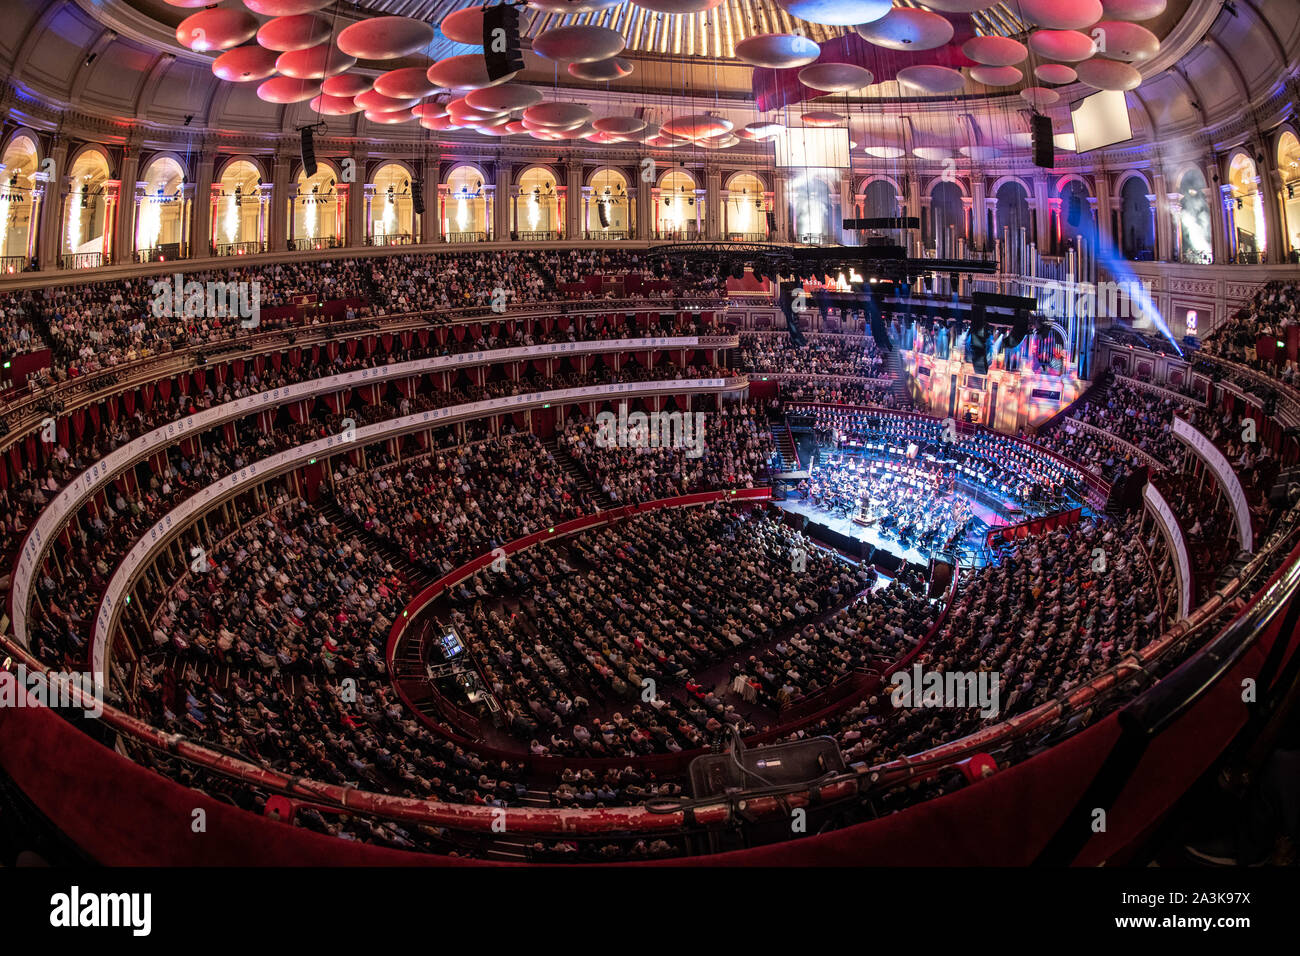 Pyrotechnics during the grand finale of the final performance lead by Stephen Barlow conducting the Bournemouth Sympathy Orchestra and Chorus during a performance of 1812 Overture by Tchaikovsky at Classic FM Live at London's Royal Albert Hall. Stock Photo